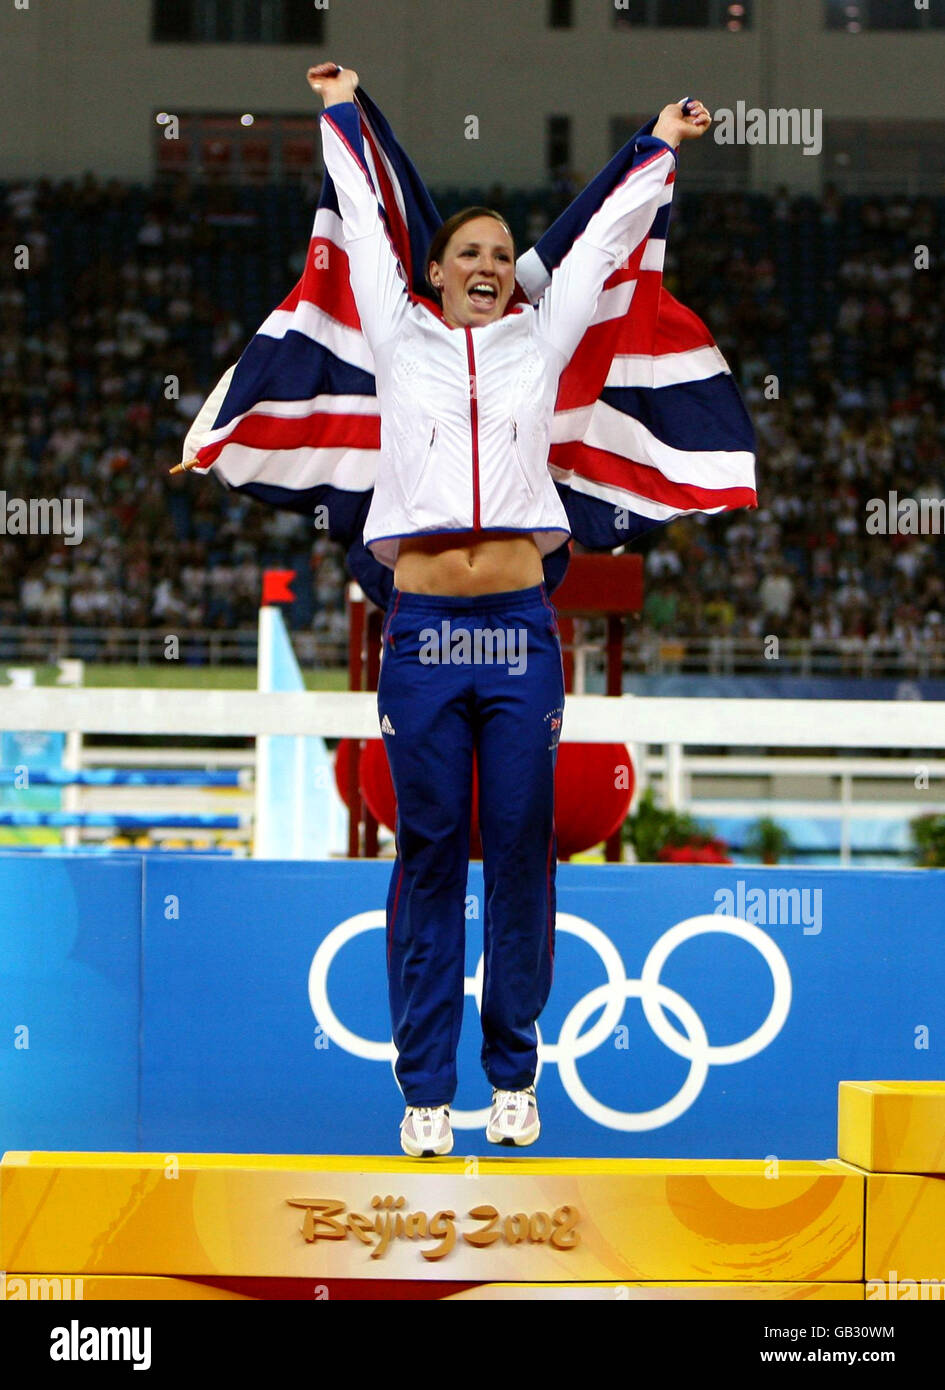 Great Britain's Heather Fell celebrates her silver medal won in the the Women's Modern Pentathlon at the 2008 Beijing Olympics, China. Stock Photo